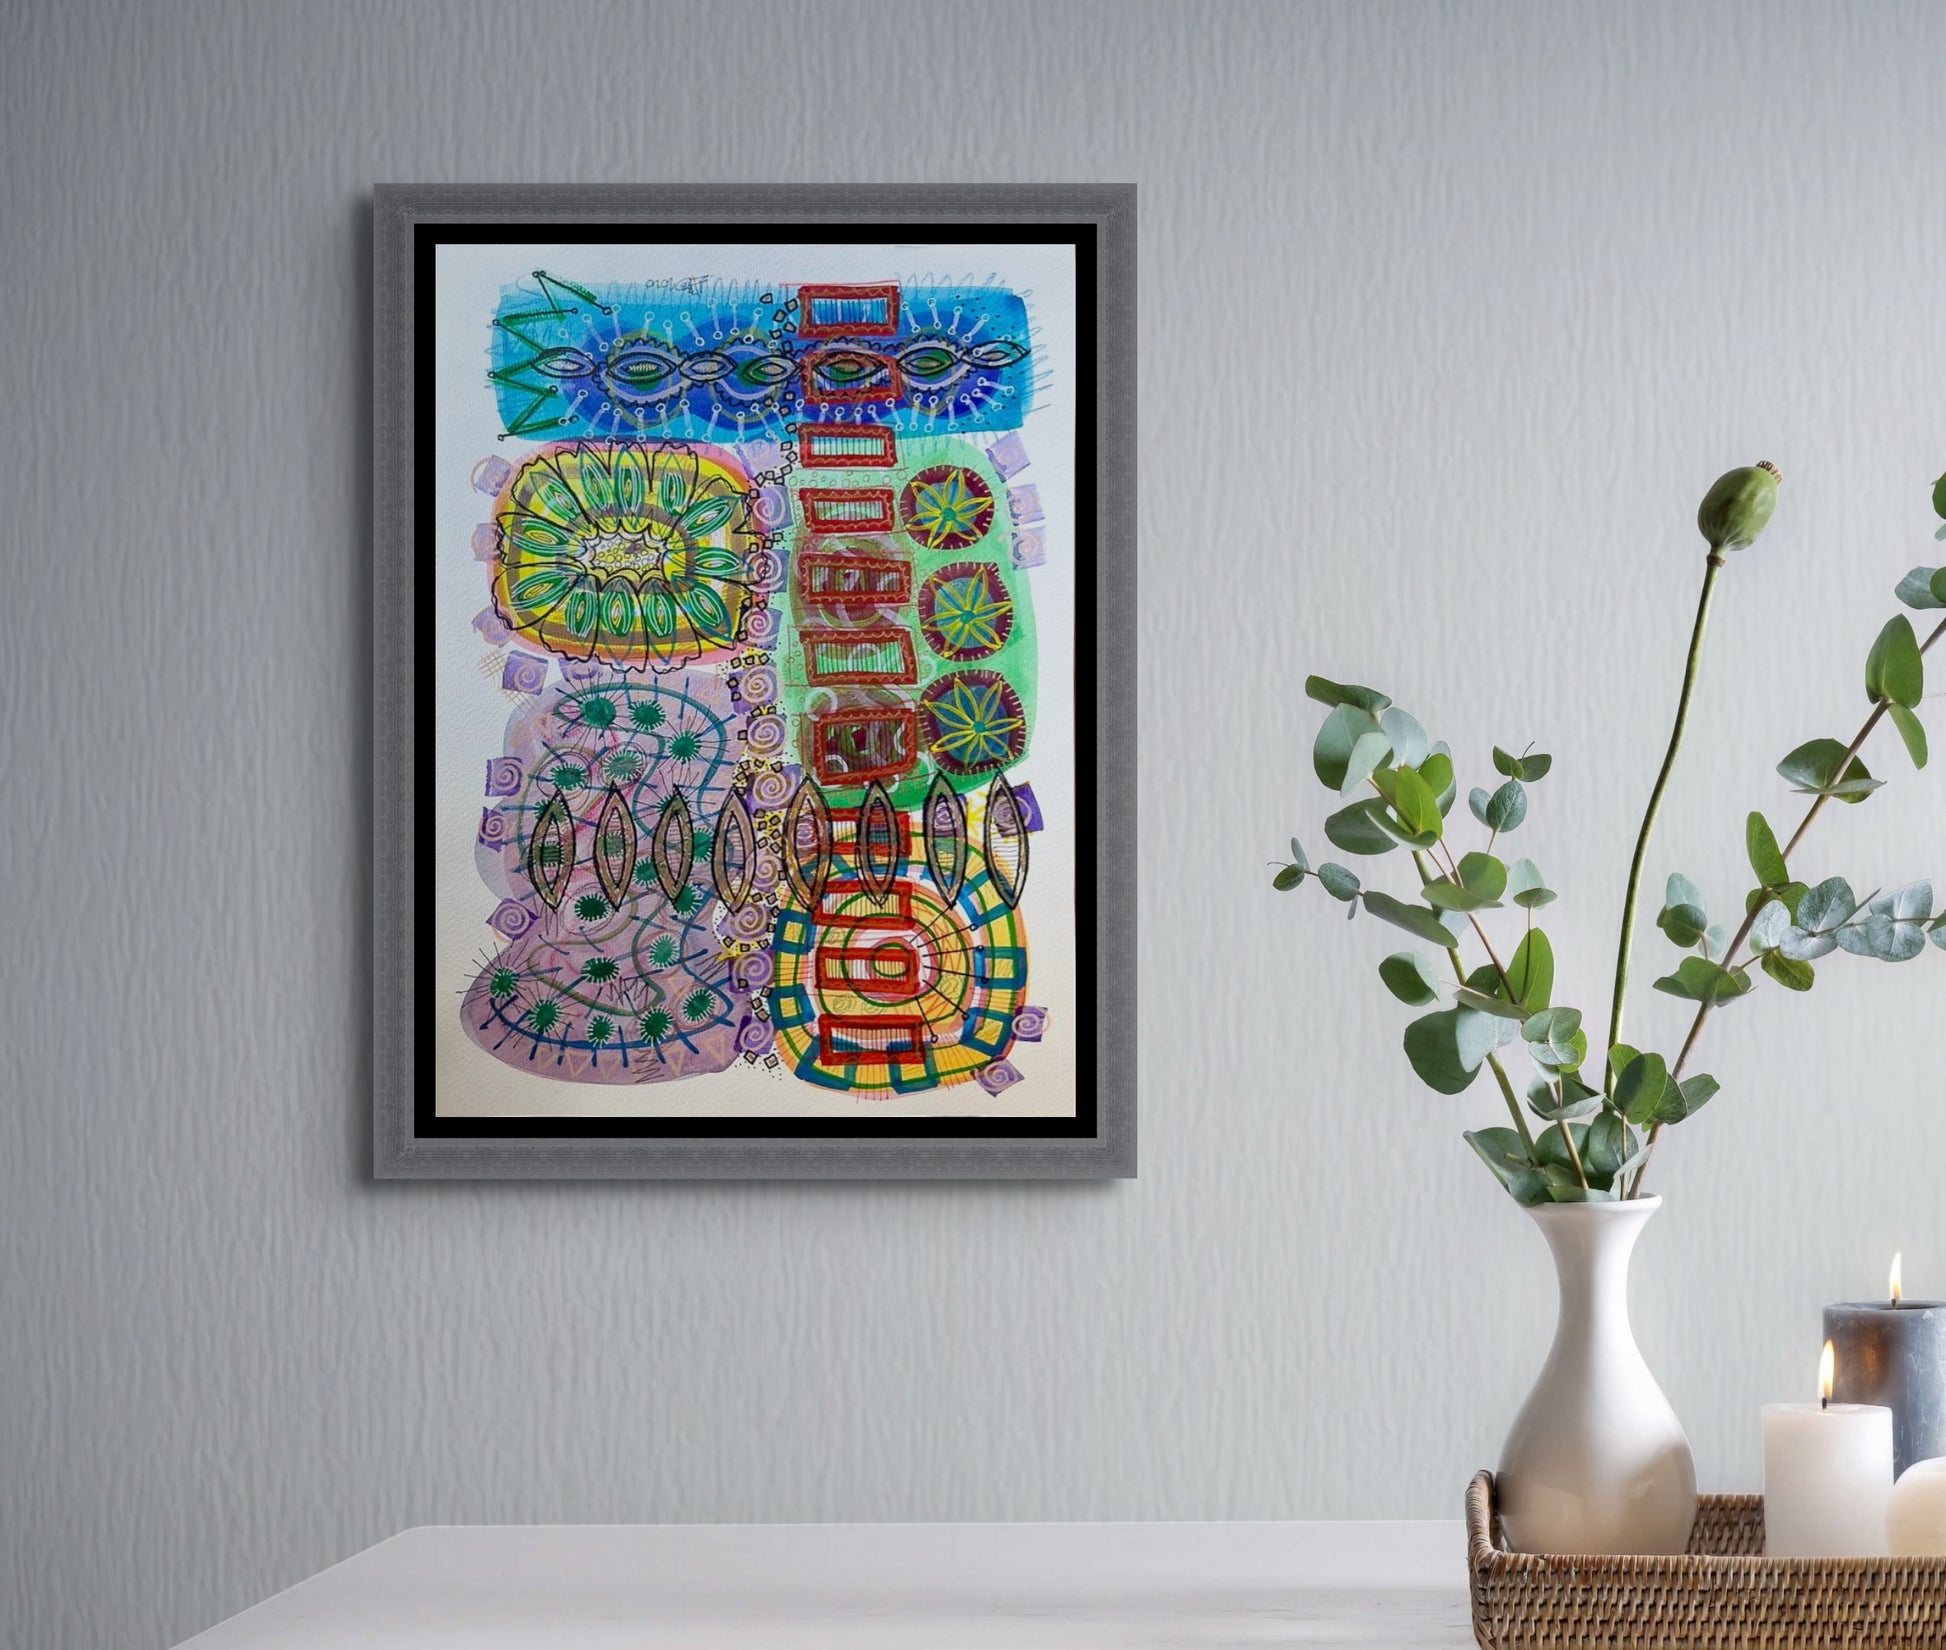 Colorful mixed media abstract and graphic design titled Stepladder by artist Jenifer Hernandez., framed for display only in grey wood and floated on black background.